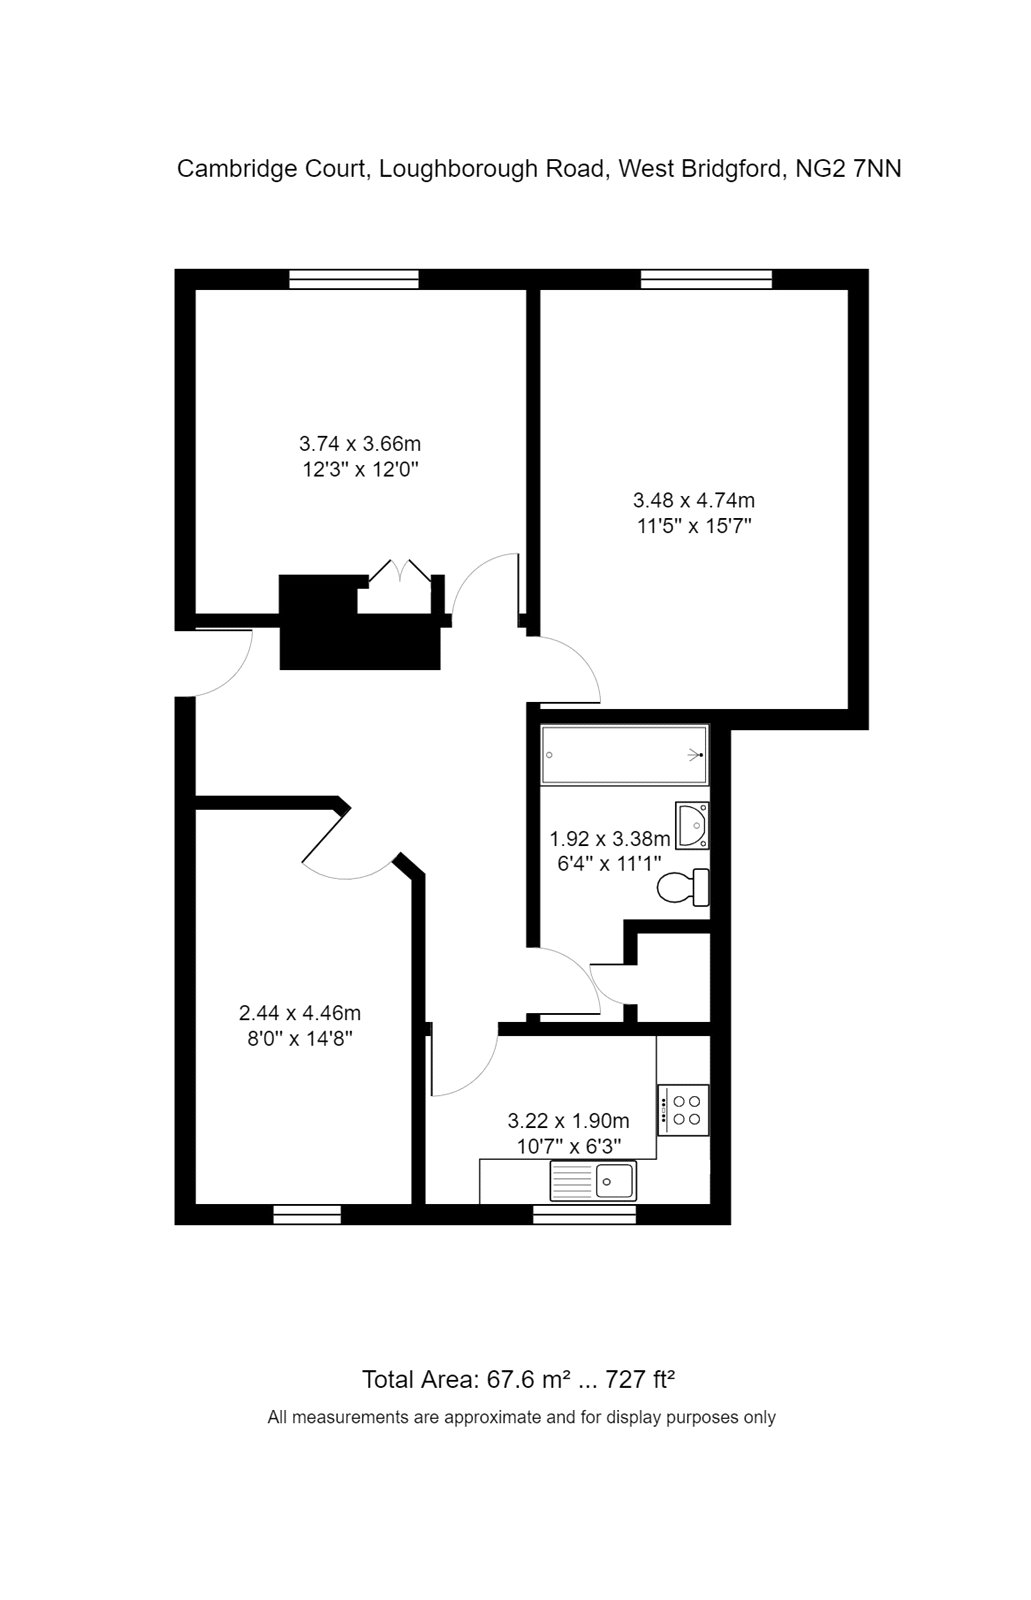 2 bed apartment to rent in Loughborough Road, West Bridgford - Property Floorplan